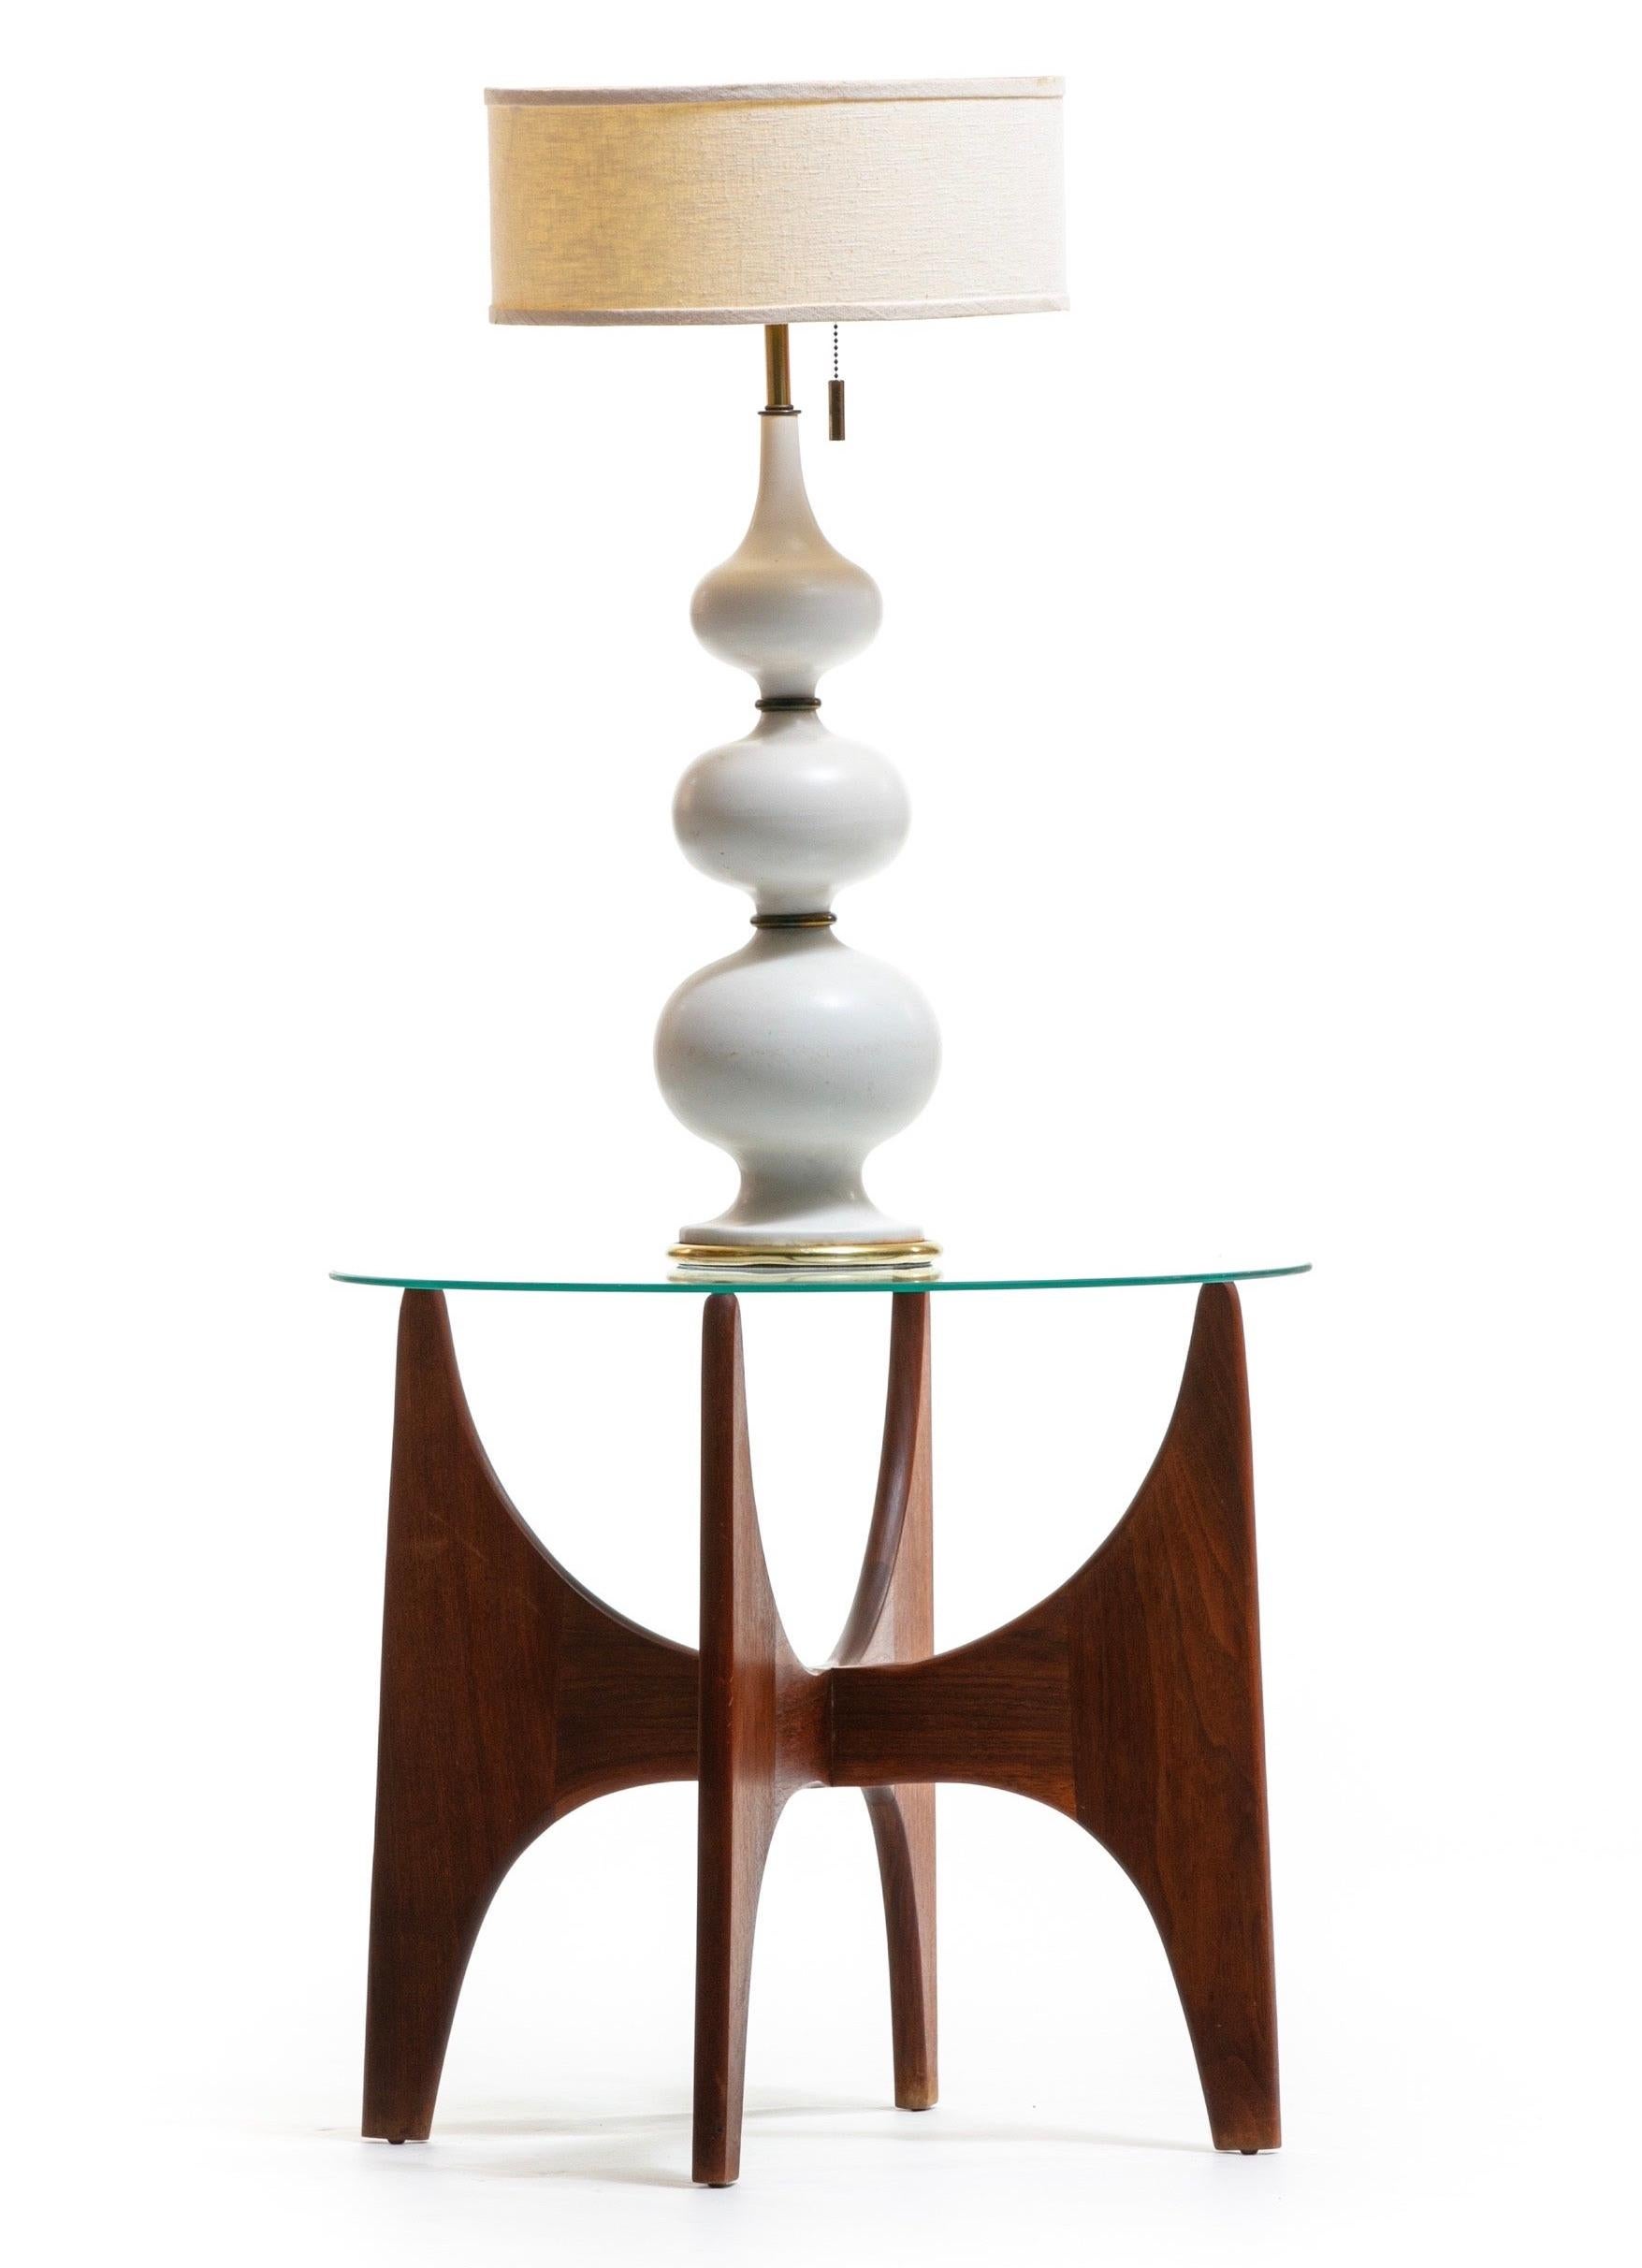 Modern sculptural 1924-T24 walnut side table designed by Adrian Pearsall circa 1960 for Craft Associates. This Pearsall table is in great condition and features an interlocked 